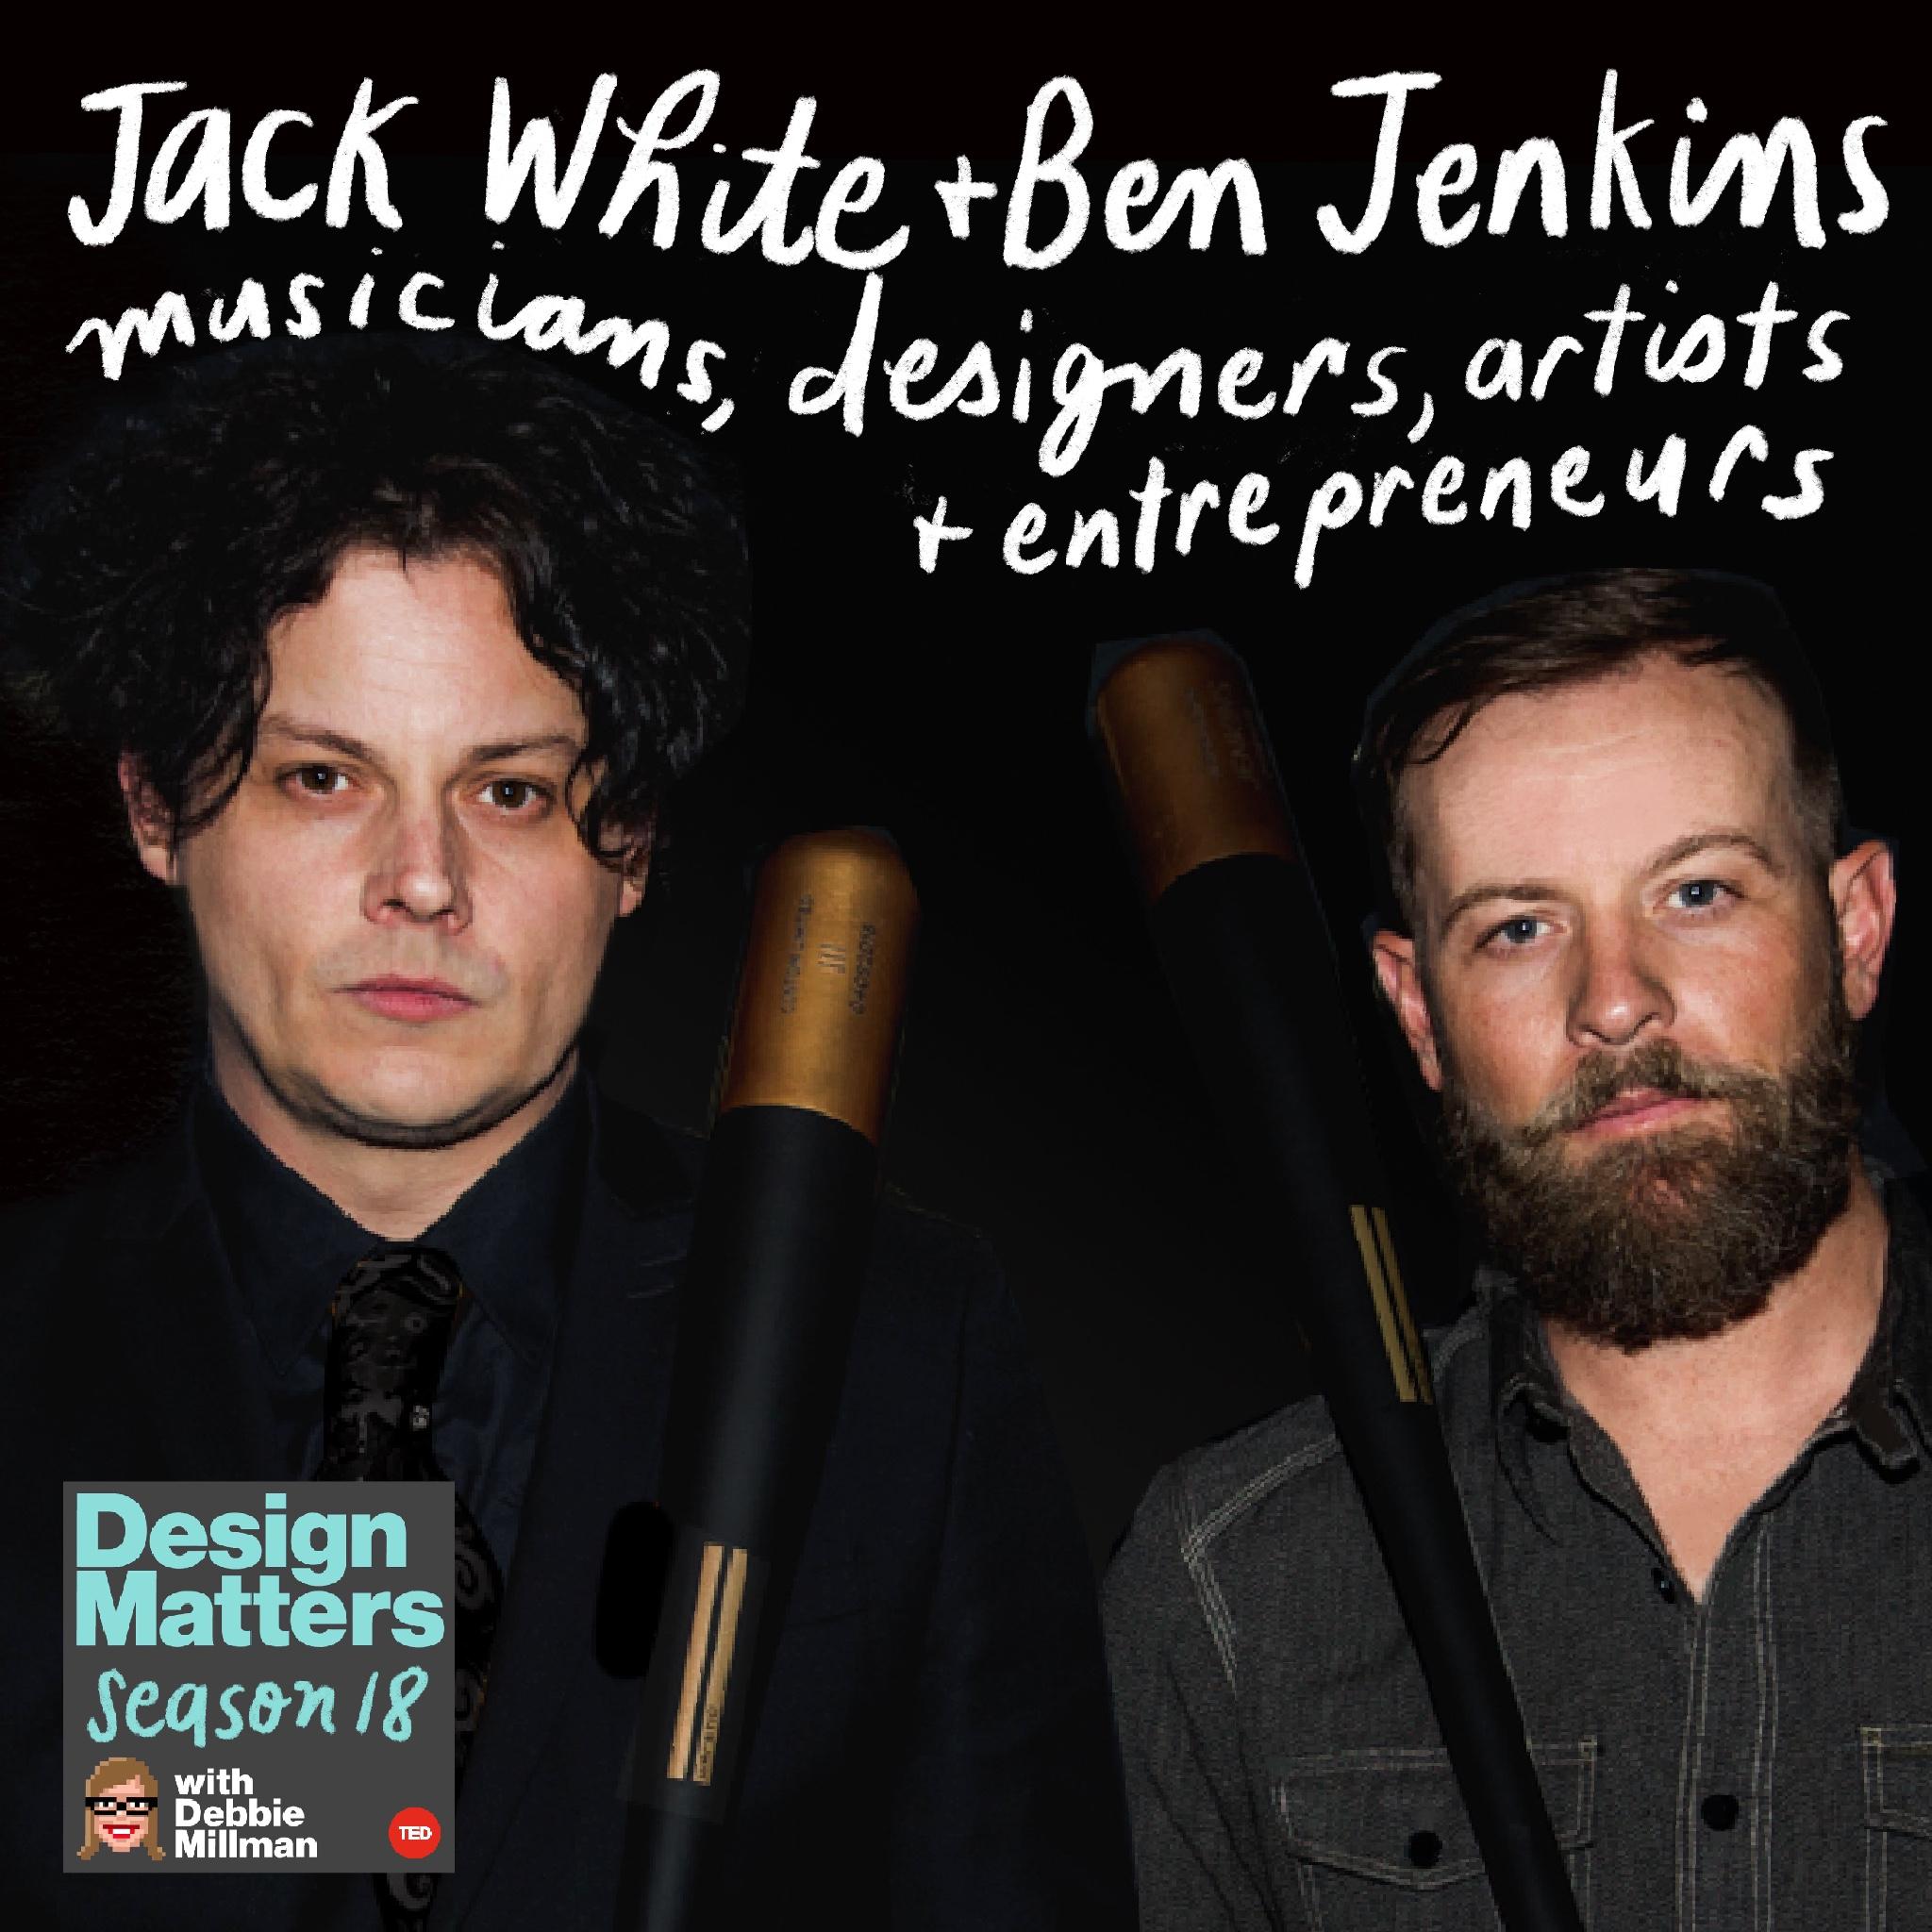 Thumbnail for "Best of Design Matters: Jack White and Ben Jenkins".